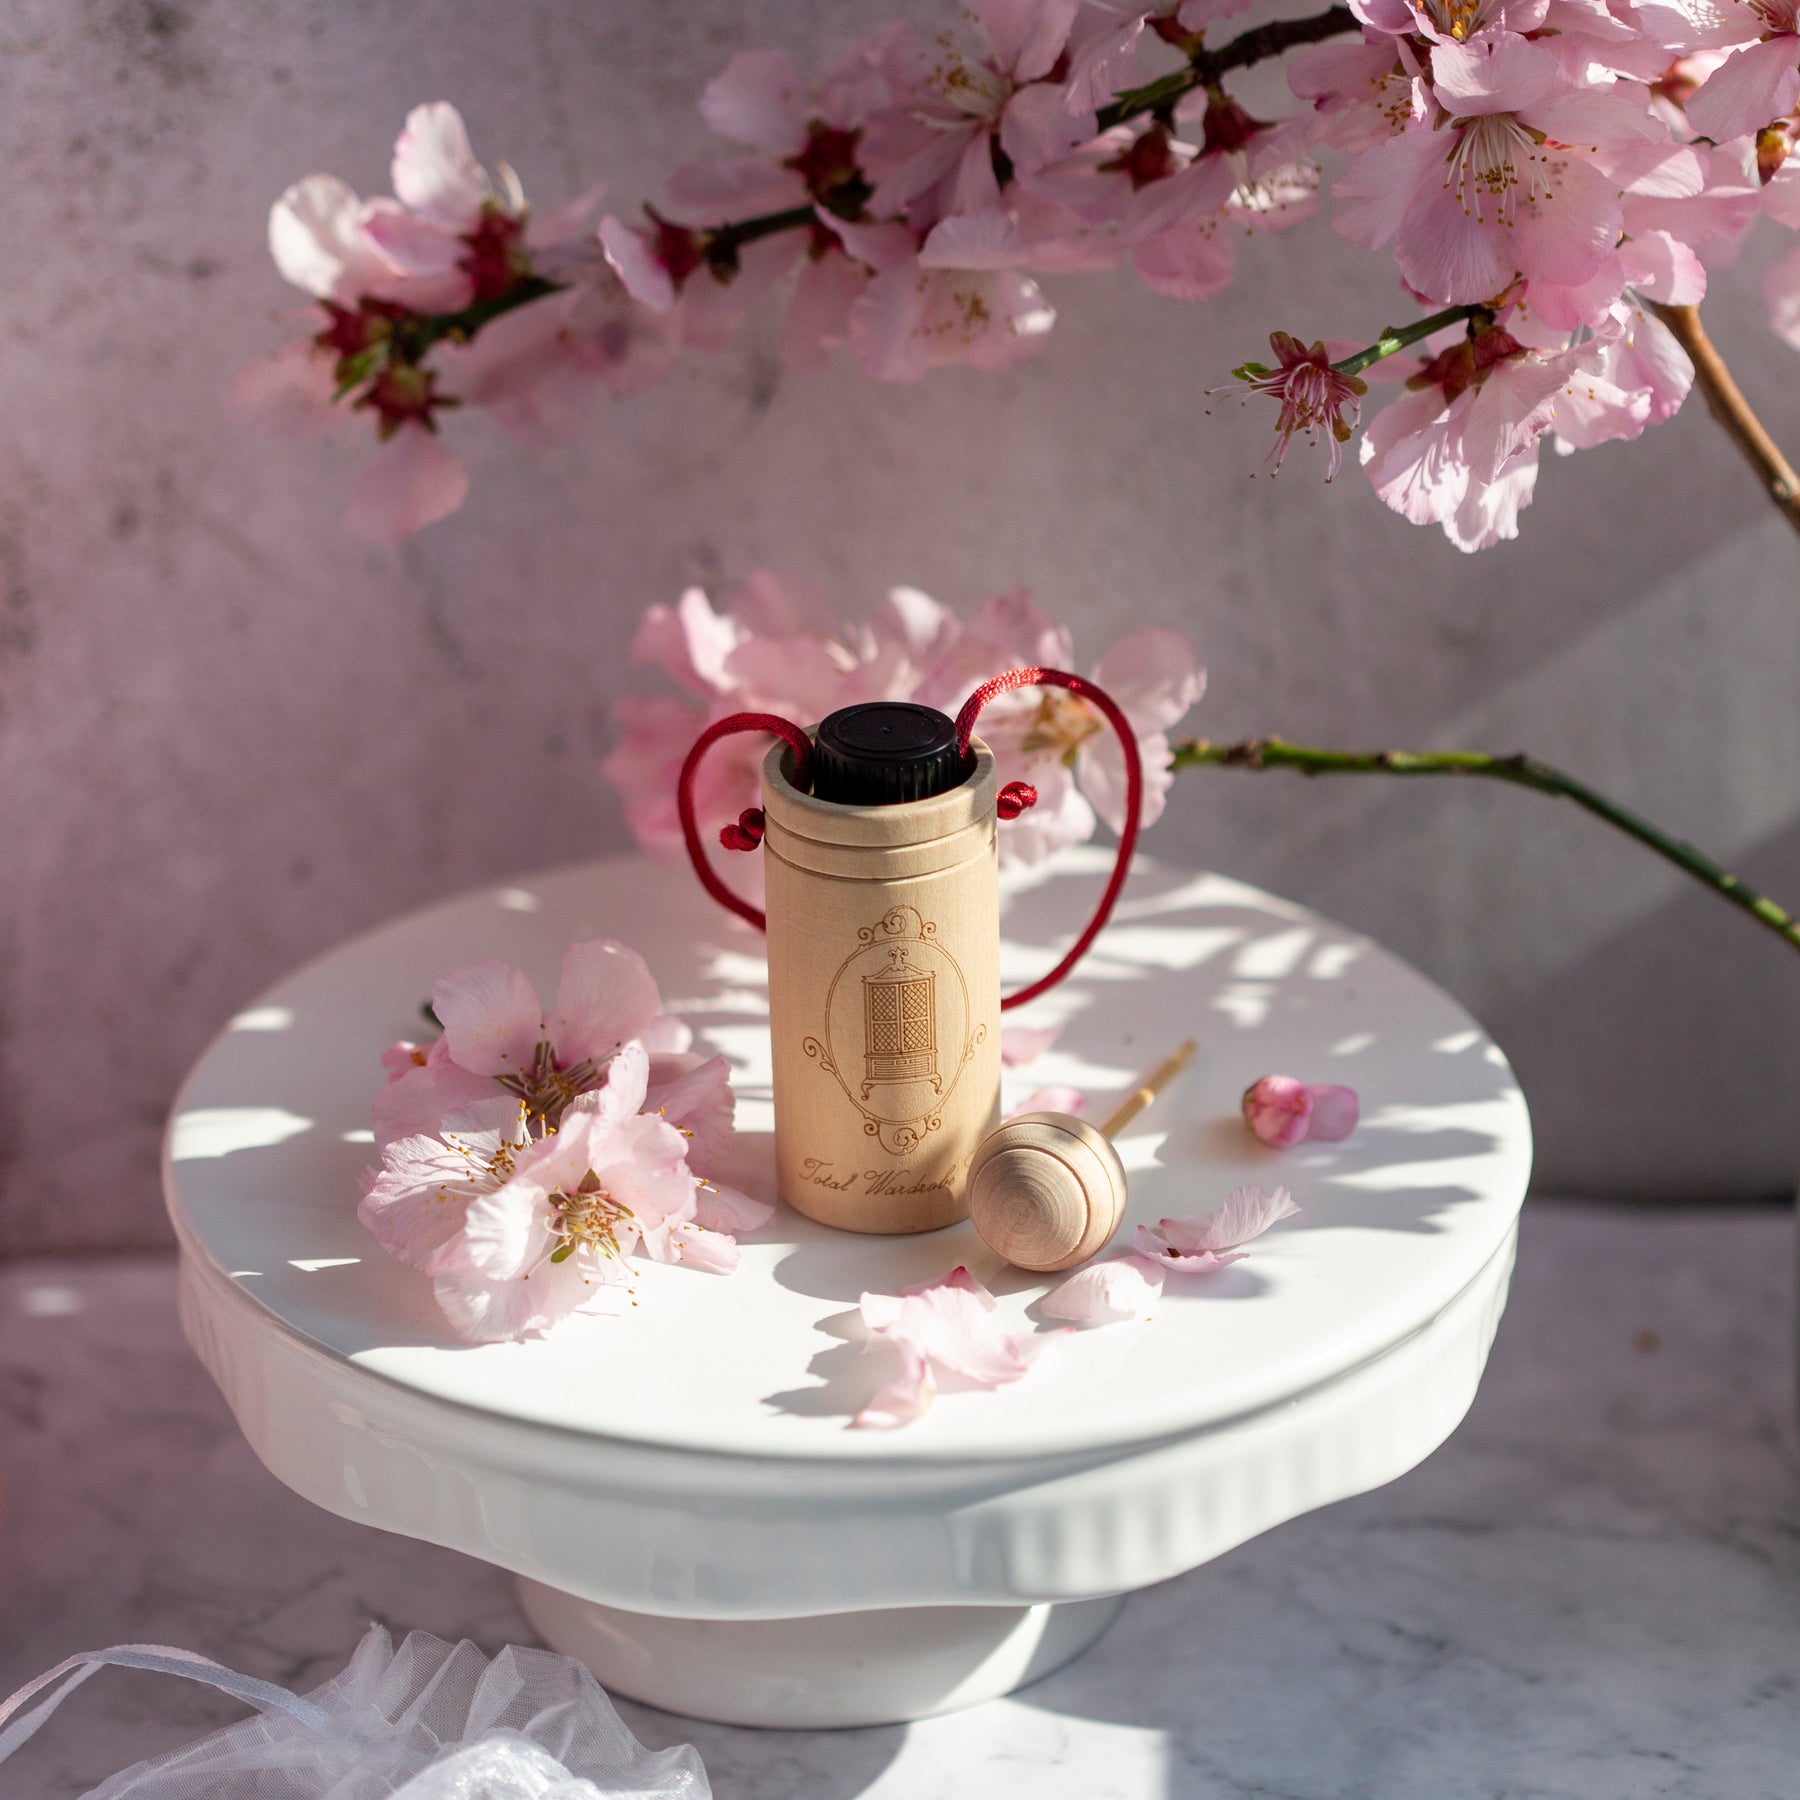 Wooden diffuser cup with essential oil inside surrounded by flowers